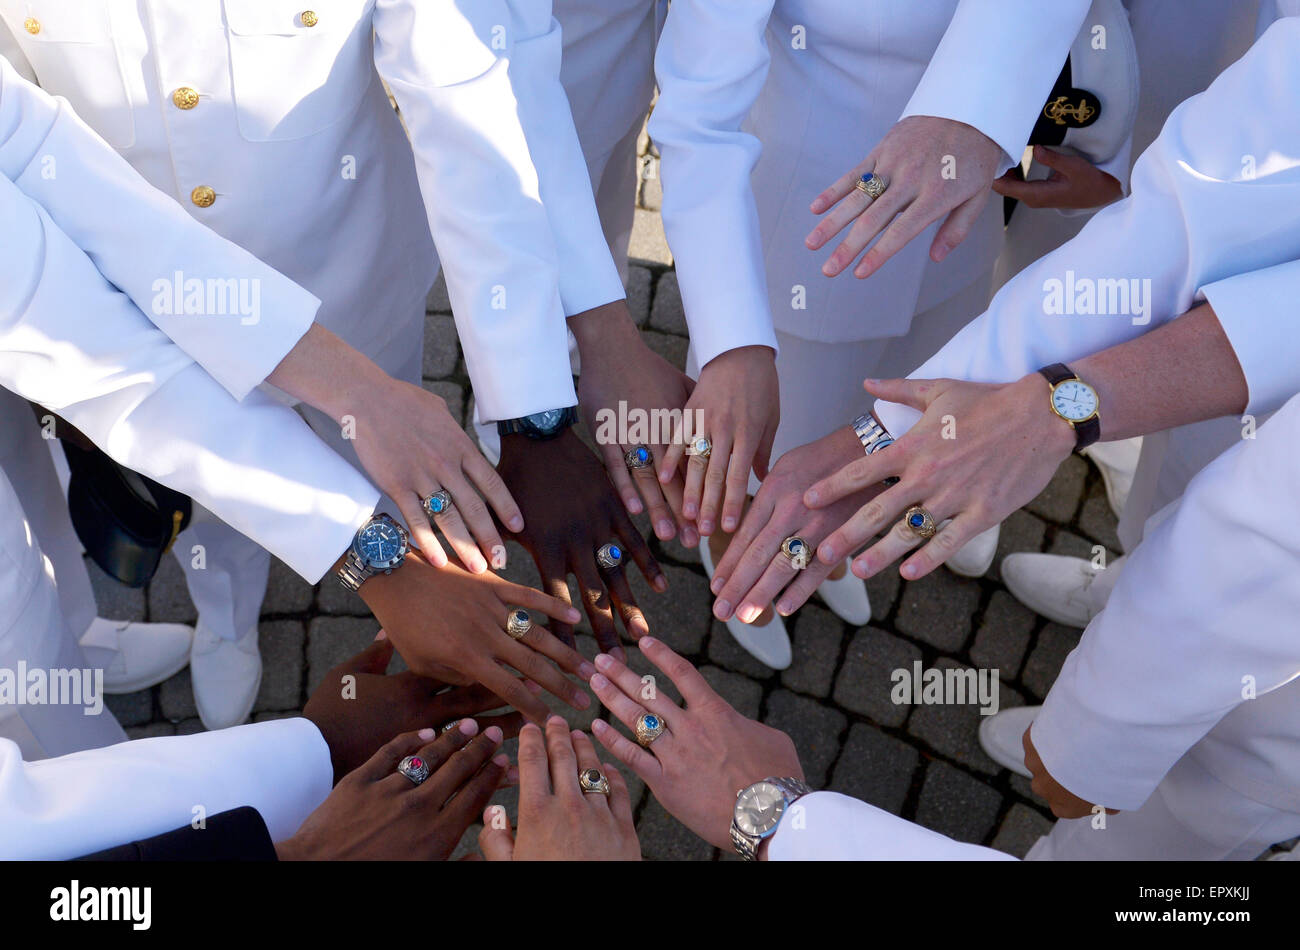 Annapolis, USA. 22nd May, 2015. Graduates show their class rings before  their graduation ceremony at the U.S. Naval Academy(USNA) in Annapolis,  Maryland, the United States, May 22, 2015. More than 1000 students